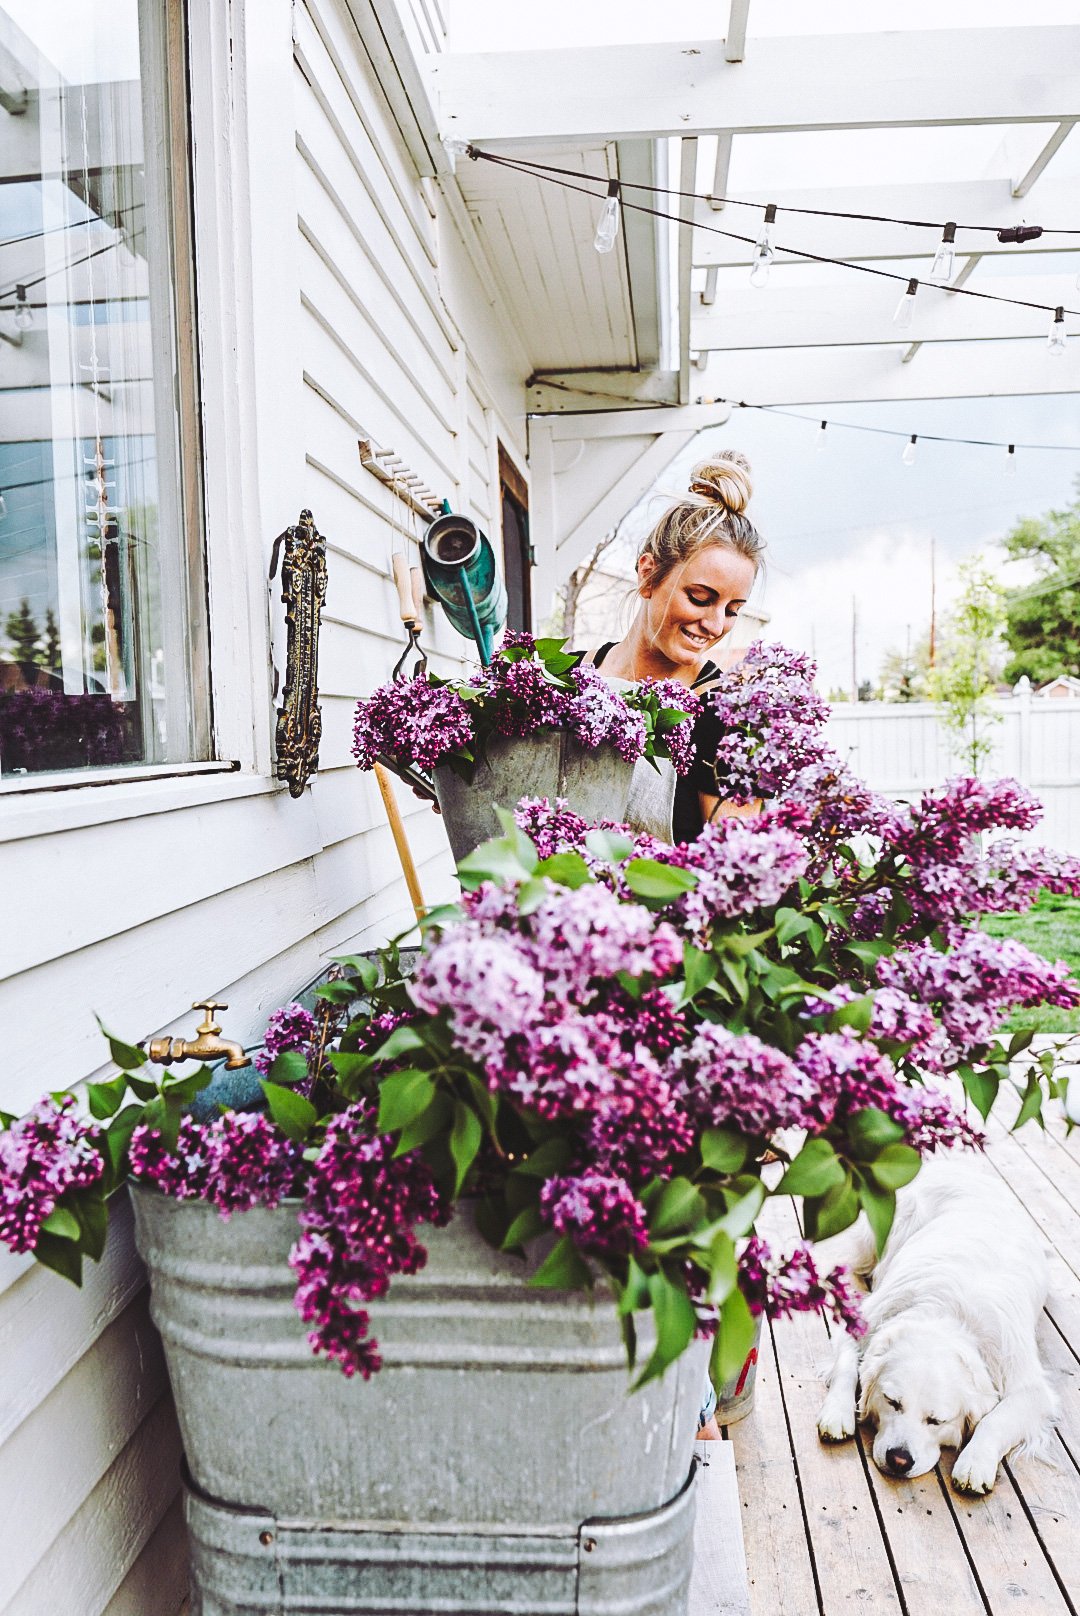 galvanized sink wash tub full of lilacs with a girl and a dog